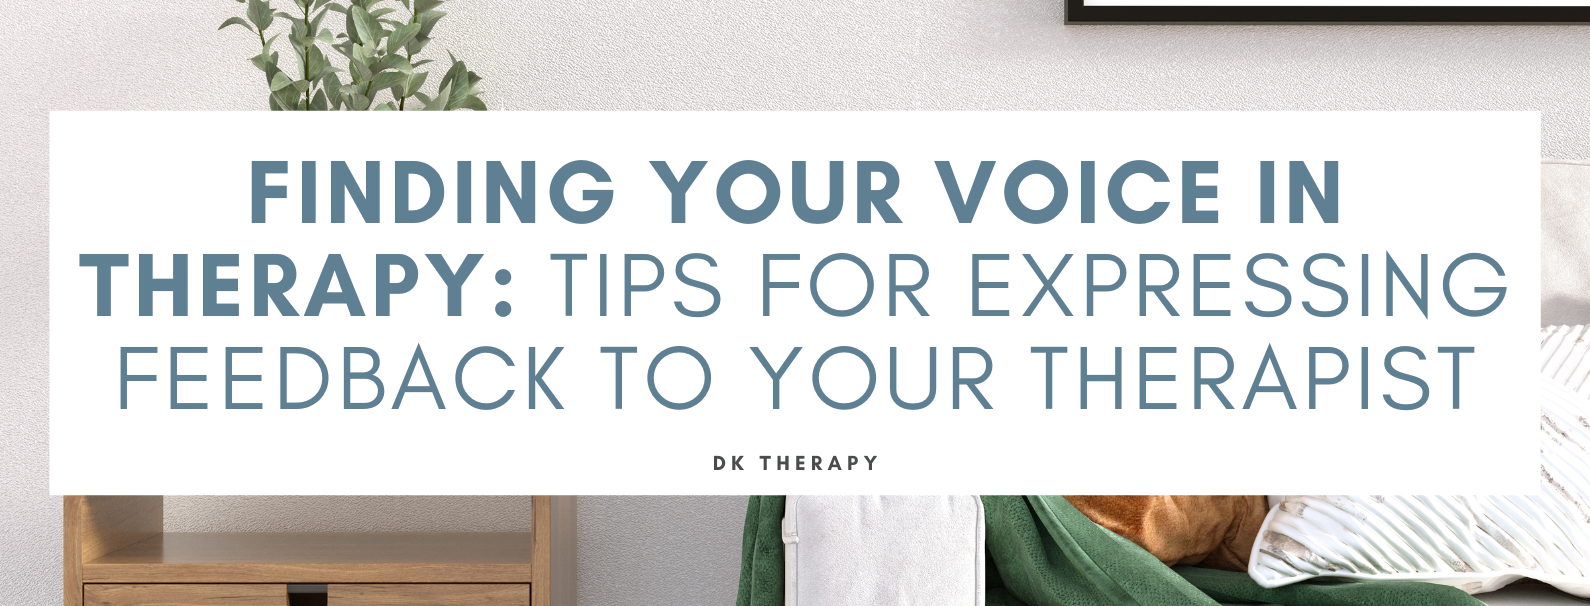 Finding Your Voice in Therapy: Tips for Expressing Feedback to your therapist